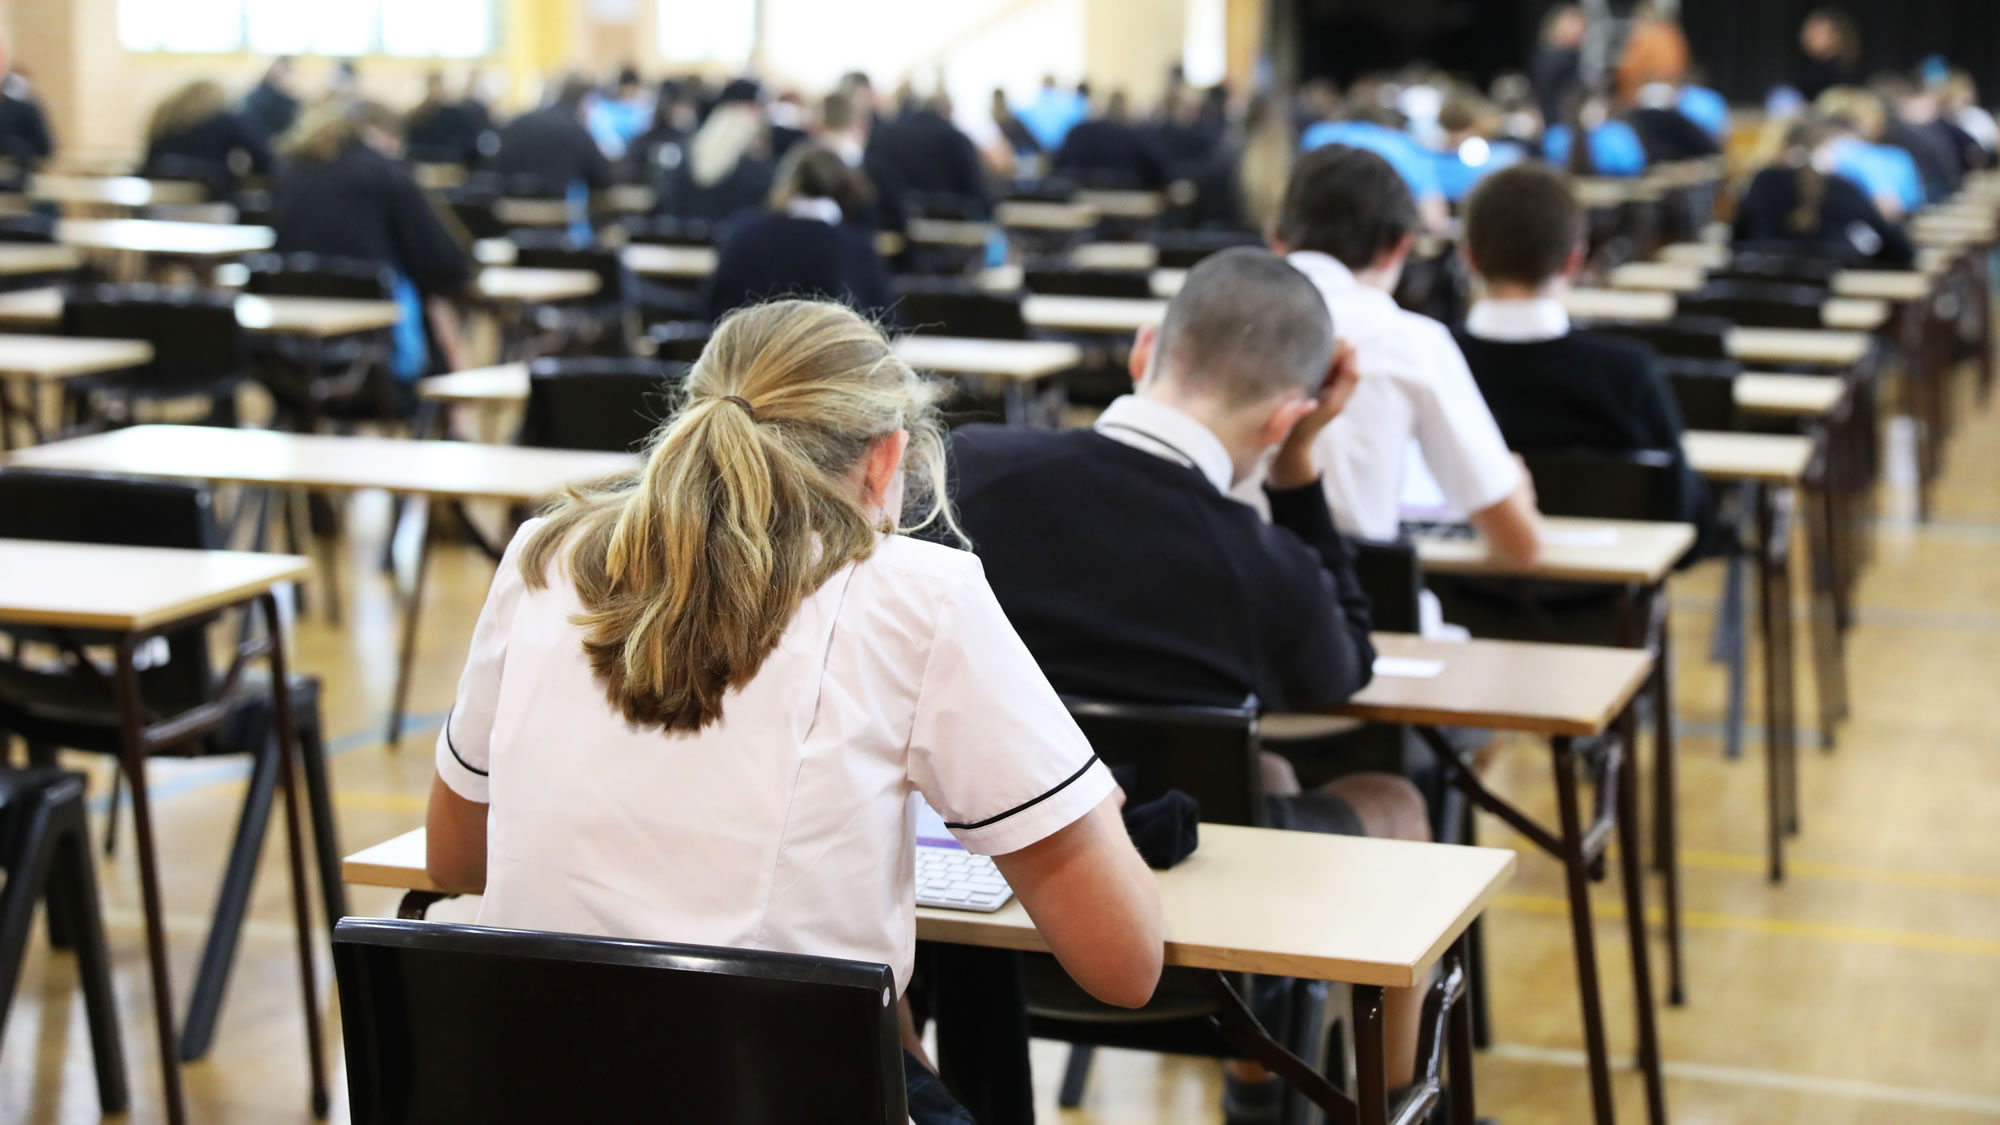 GCSE exams return this summer: what can parents do to help?